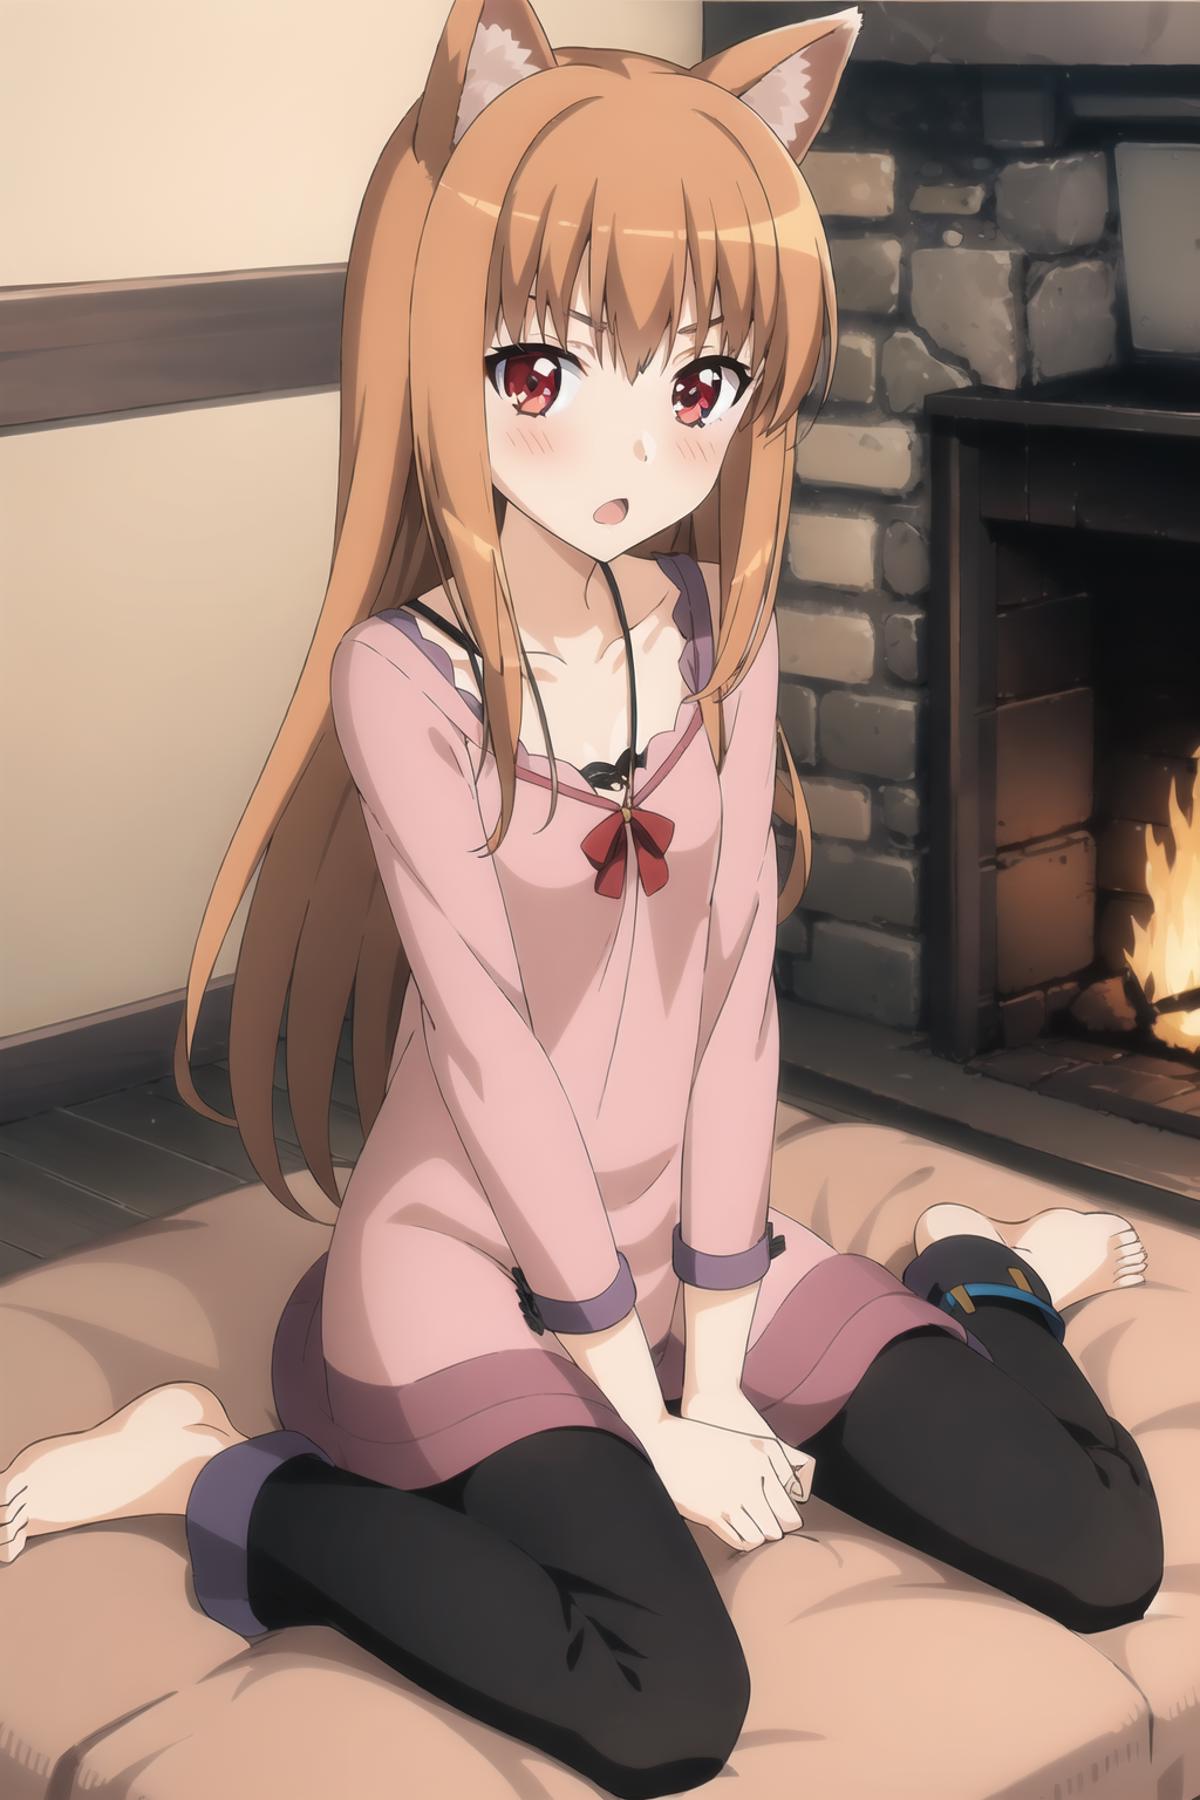 Horo/Holo (Spice and Wolf) image by BDZ888